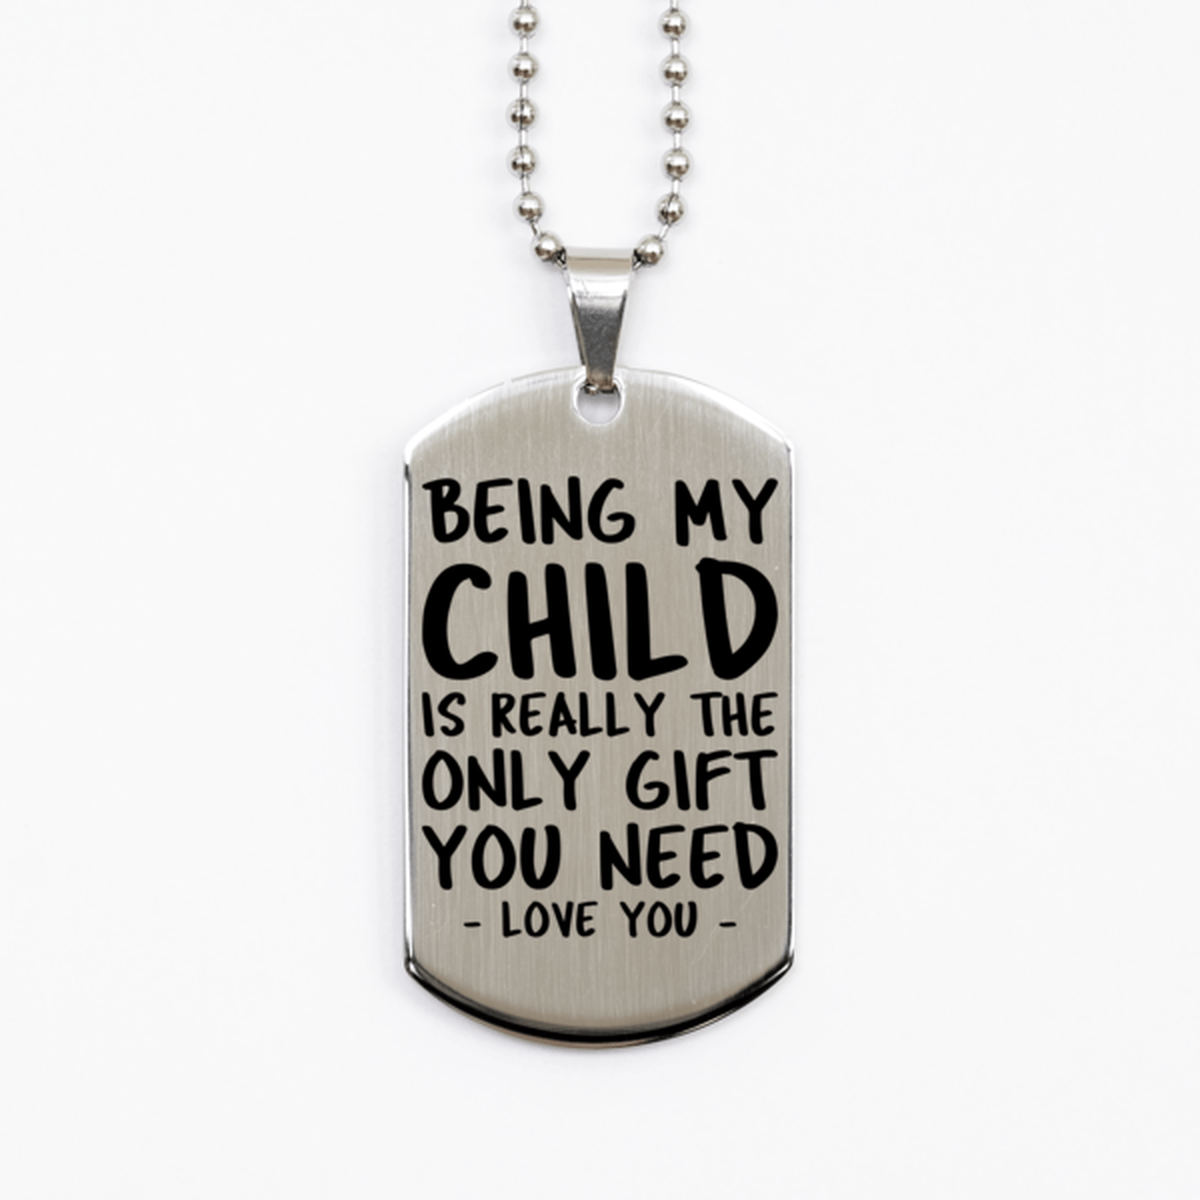 Funny Child Silver Dog Tag Necklace, Being My Child Is Really the Only Gift You Need, Best Birthday Gifts for Child